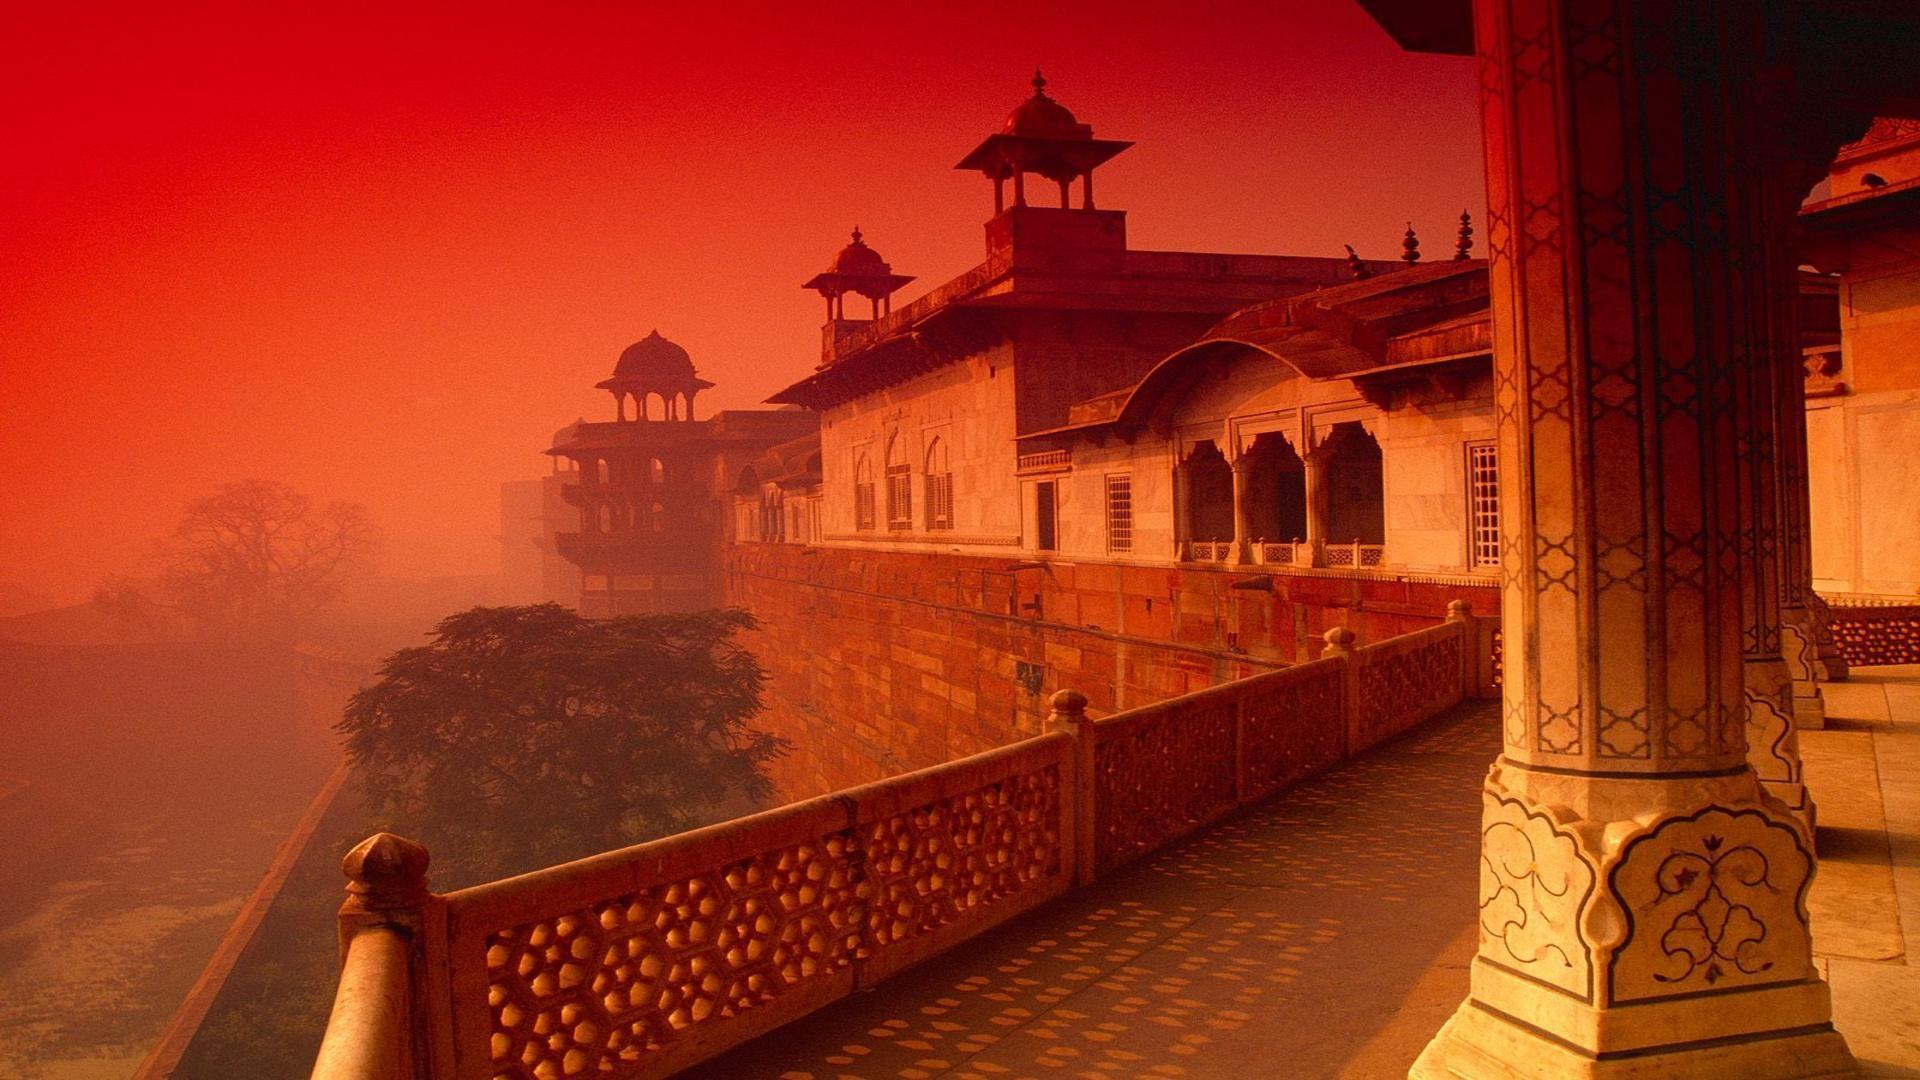 Agra fort India temple sunset burning red free desktop background